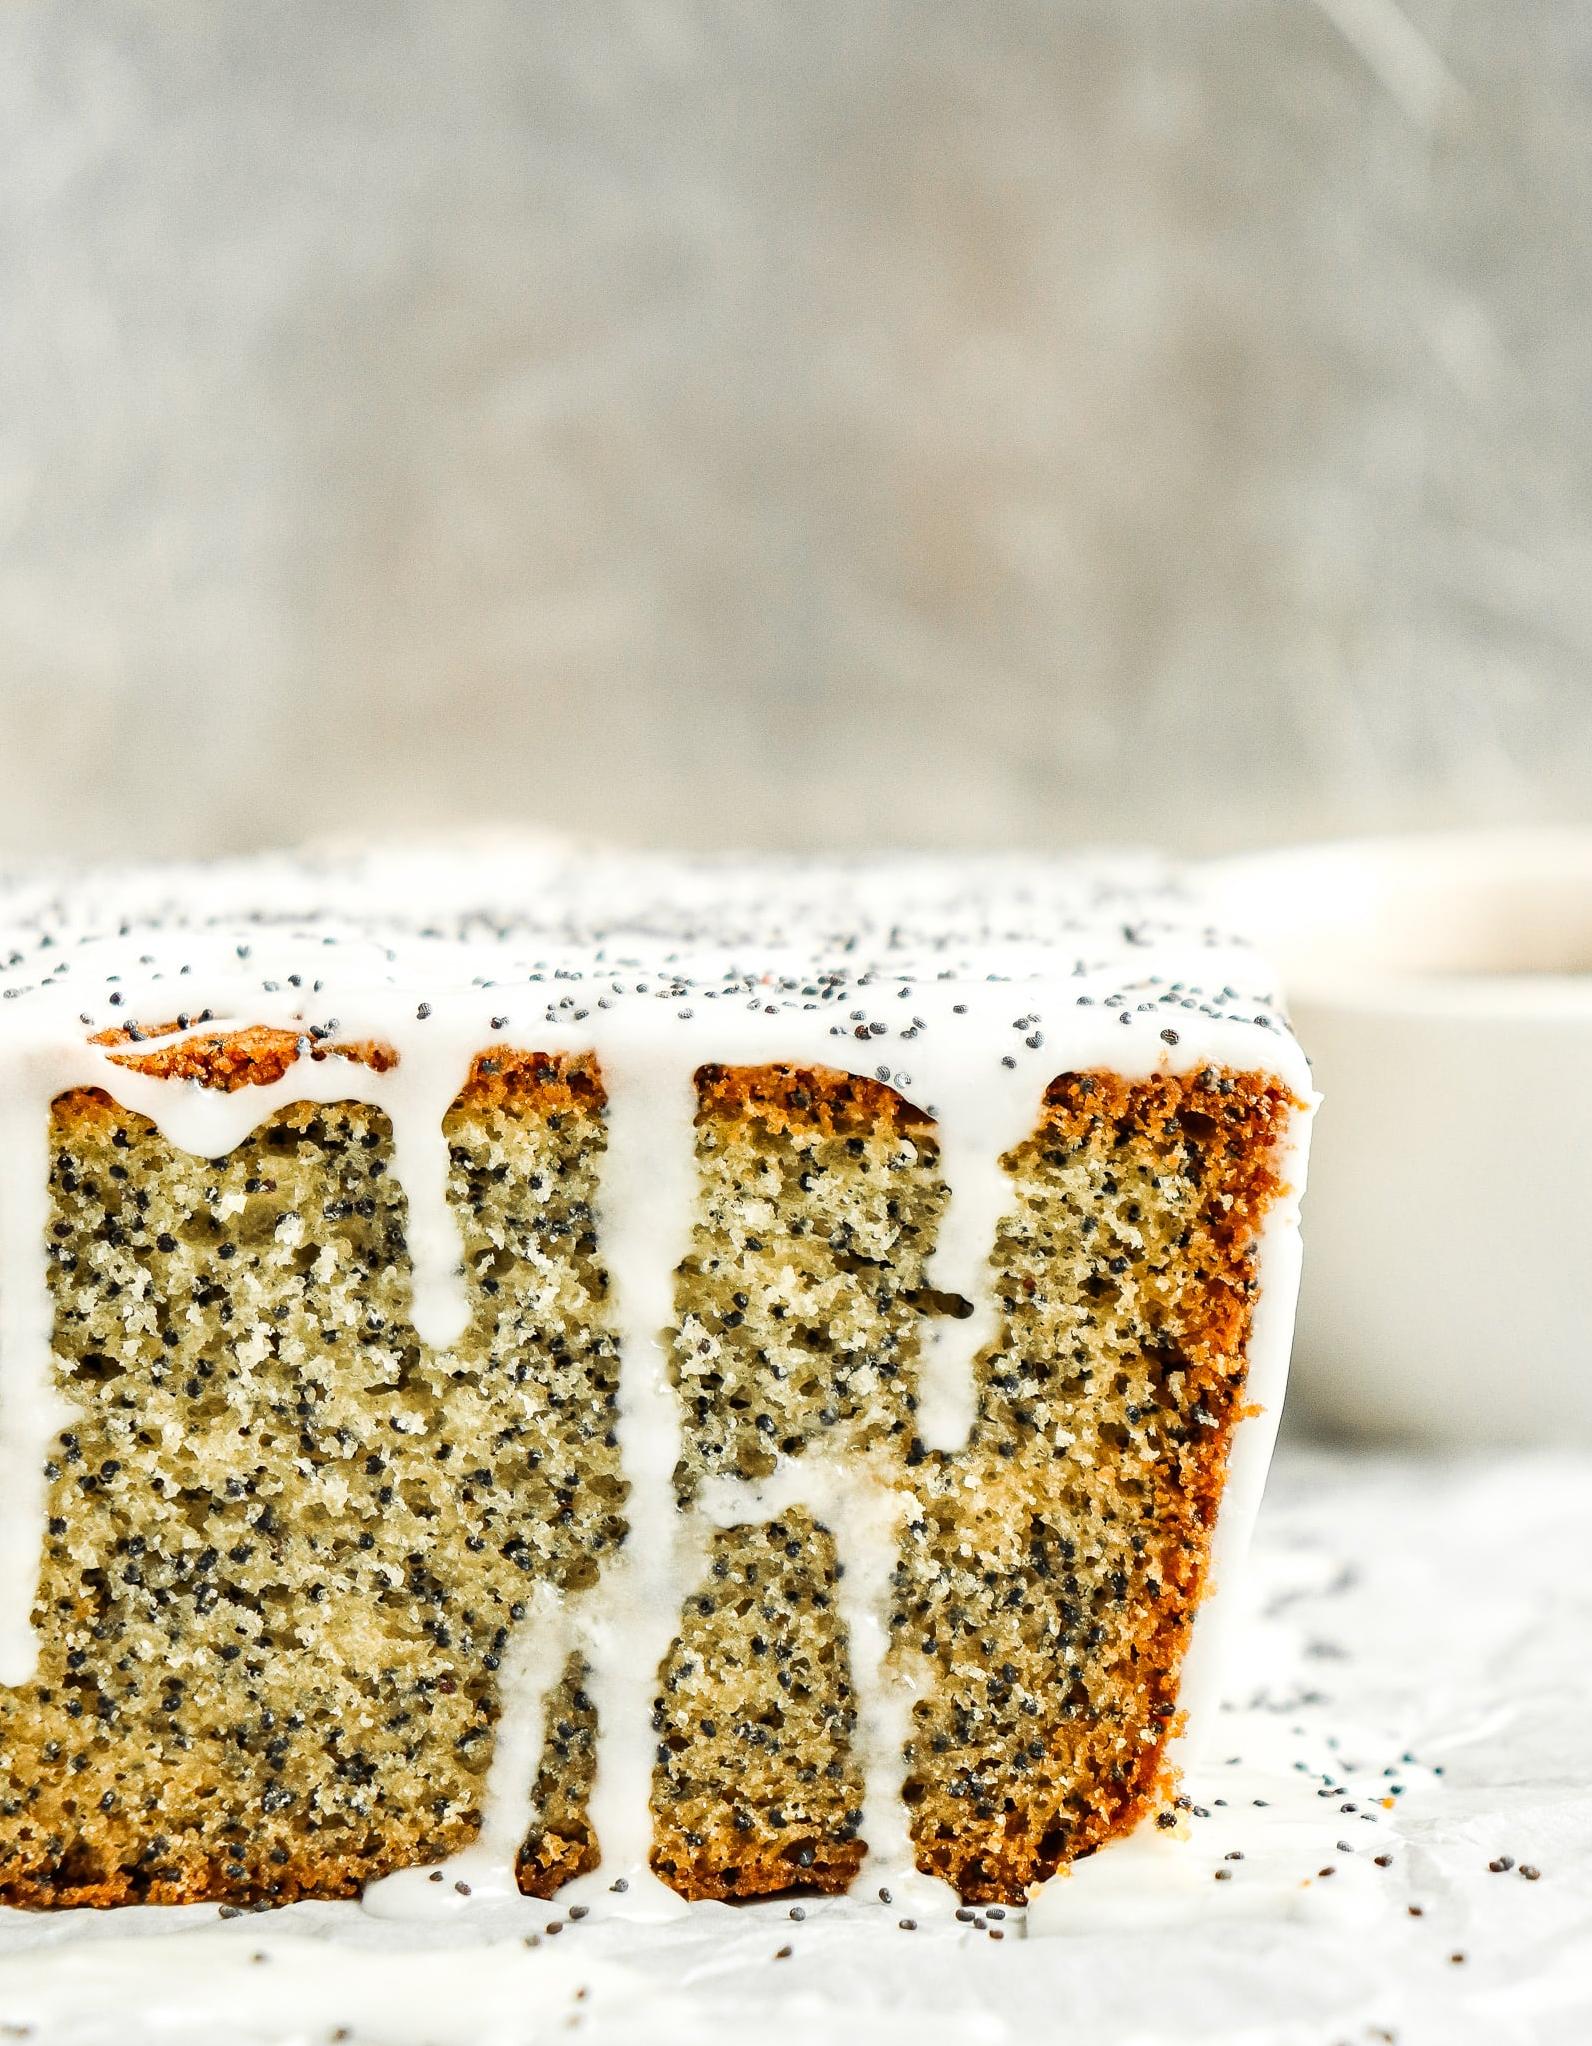  Satisfy your sweet tooth with this almond poppy seed pound cake.